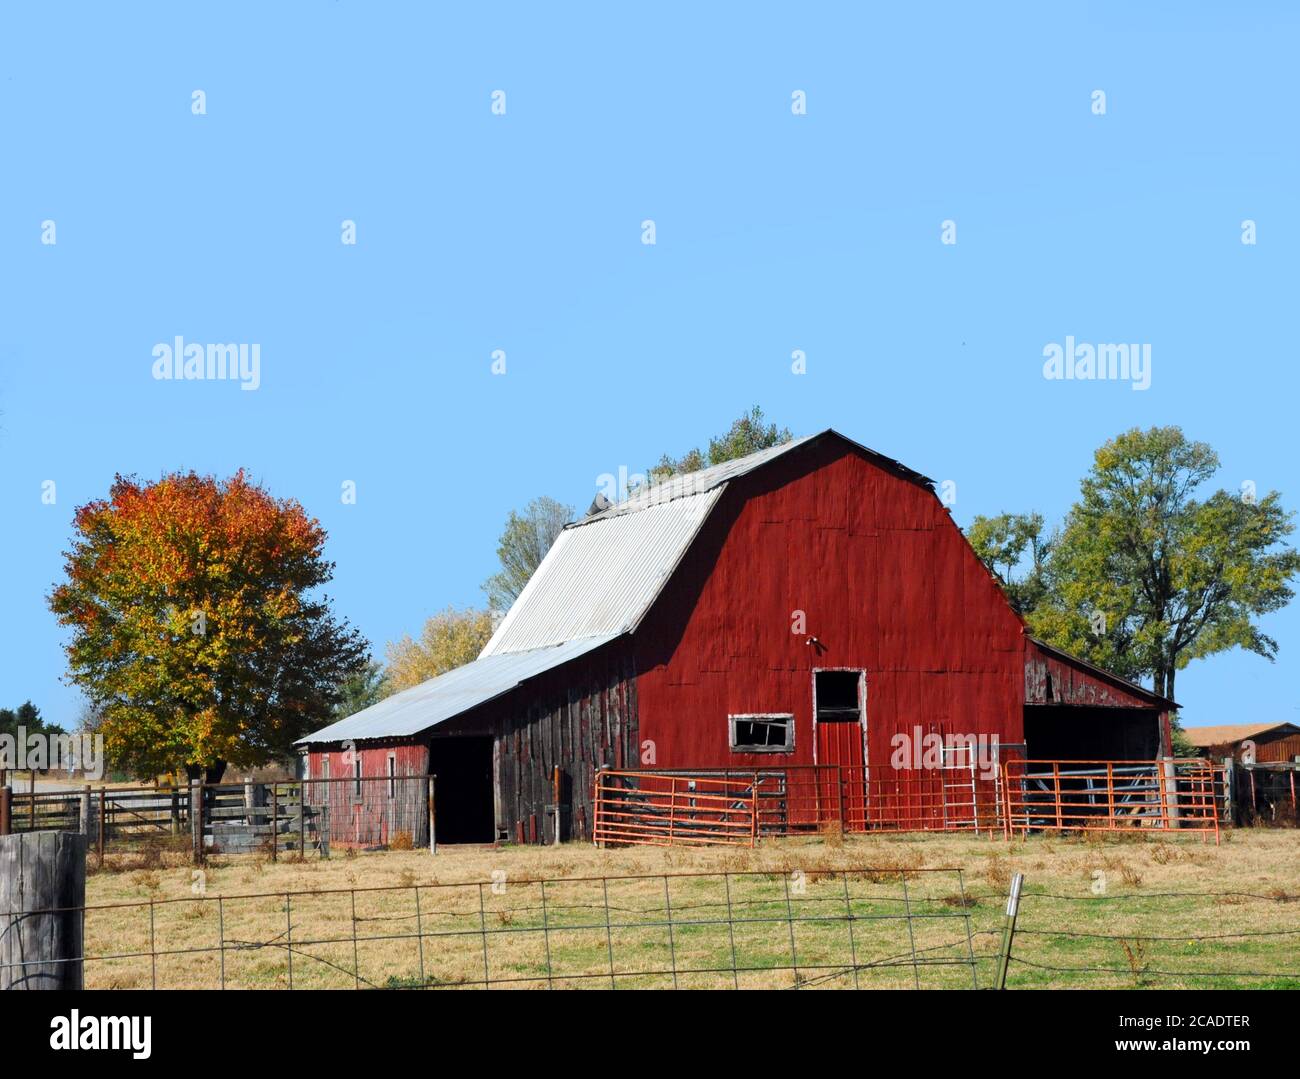 Arkansas farm site has a red tin covered barn.  Tin roof and no loft door.  Sky is blue. Stock Photo